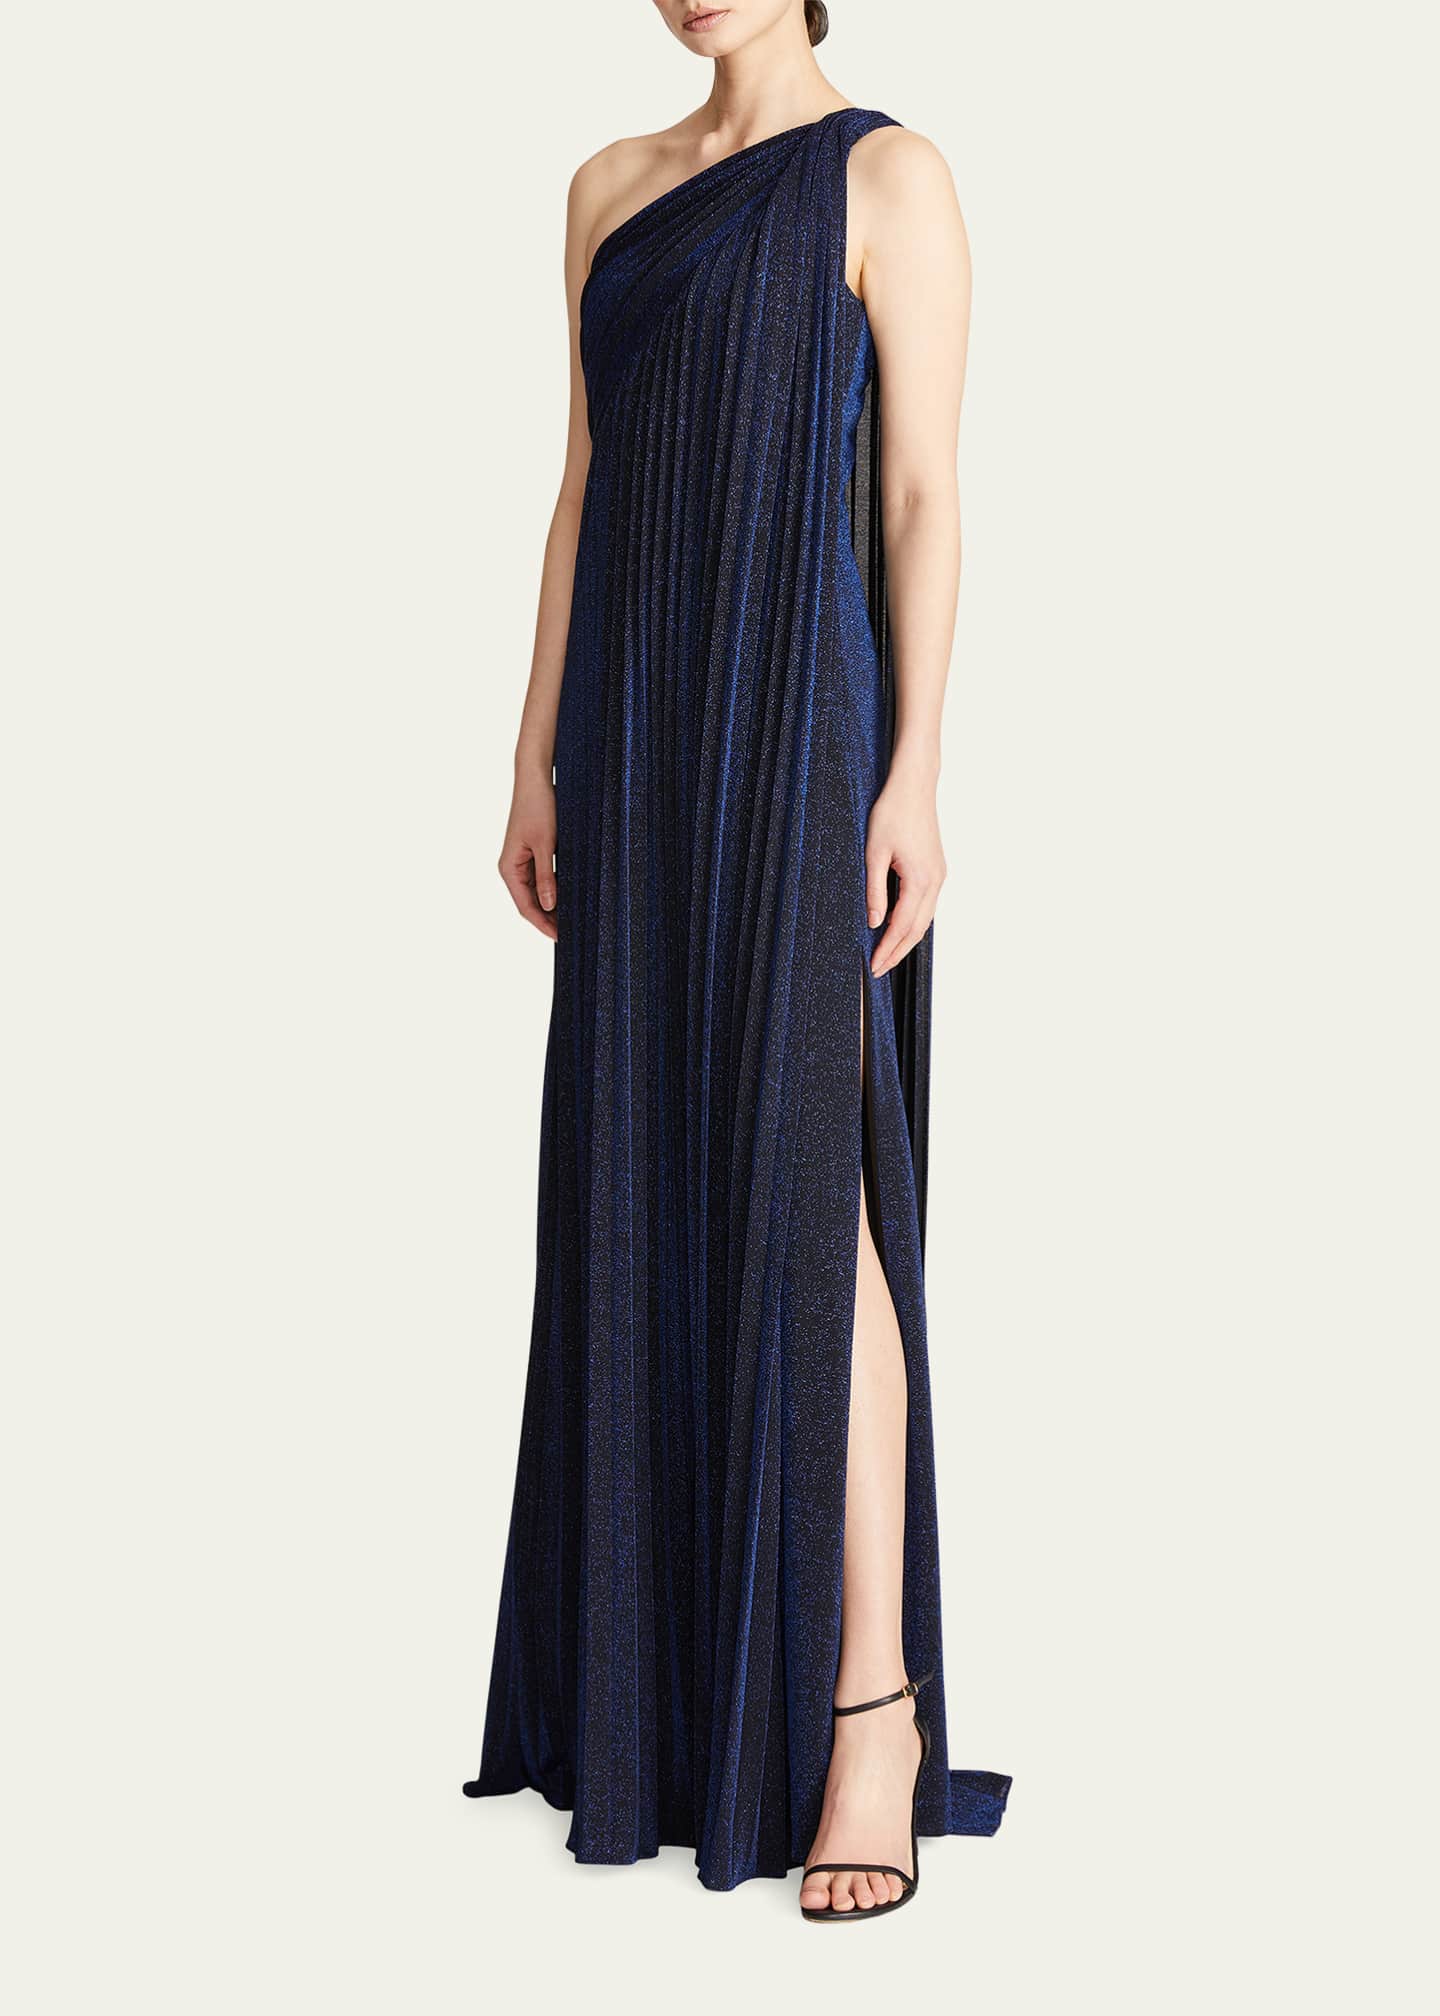 Halston One-Shoulder Pleated Knit Gown - Bergdorf Goodman